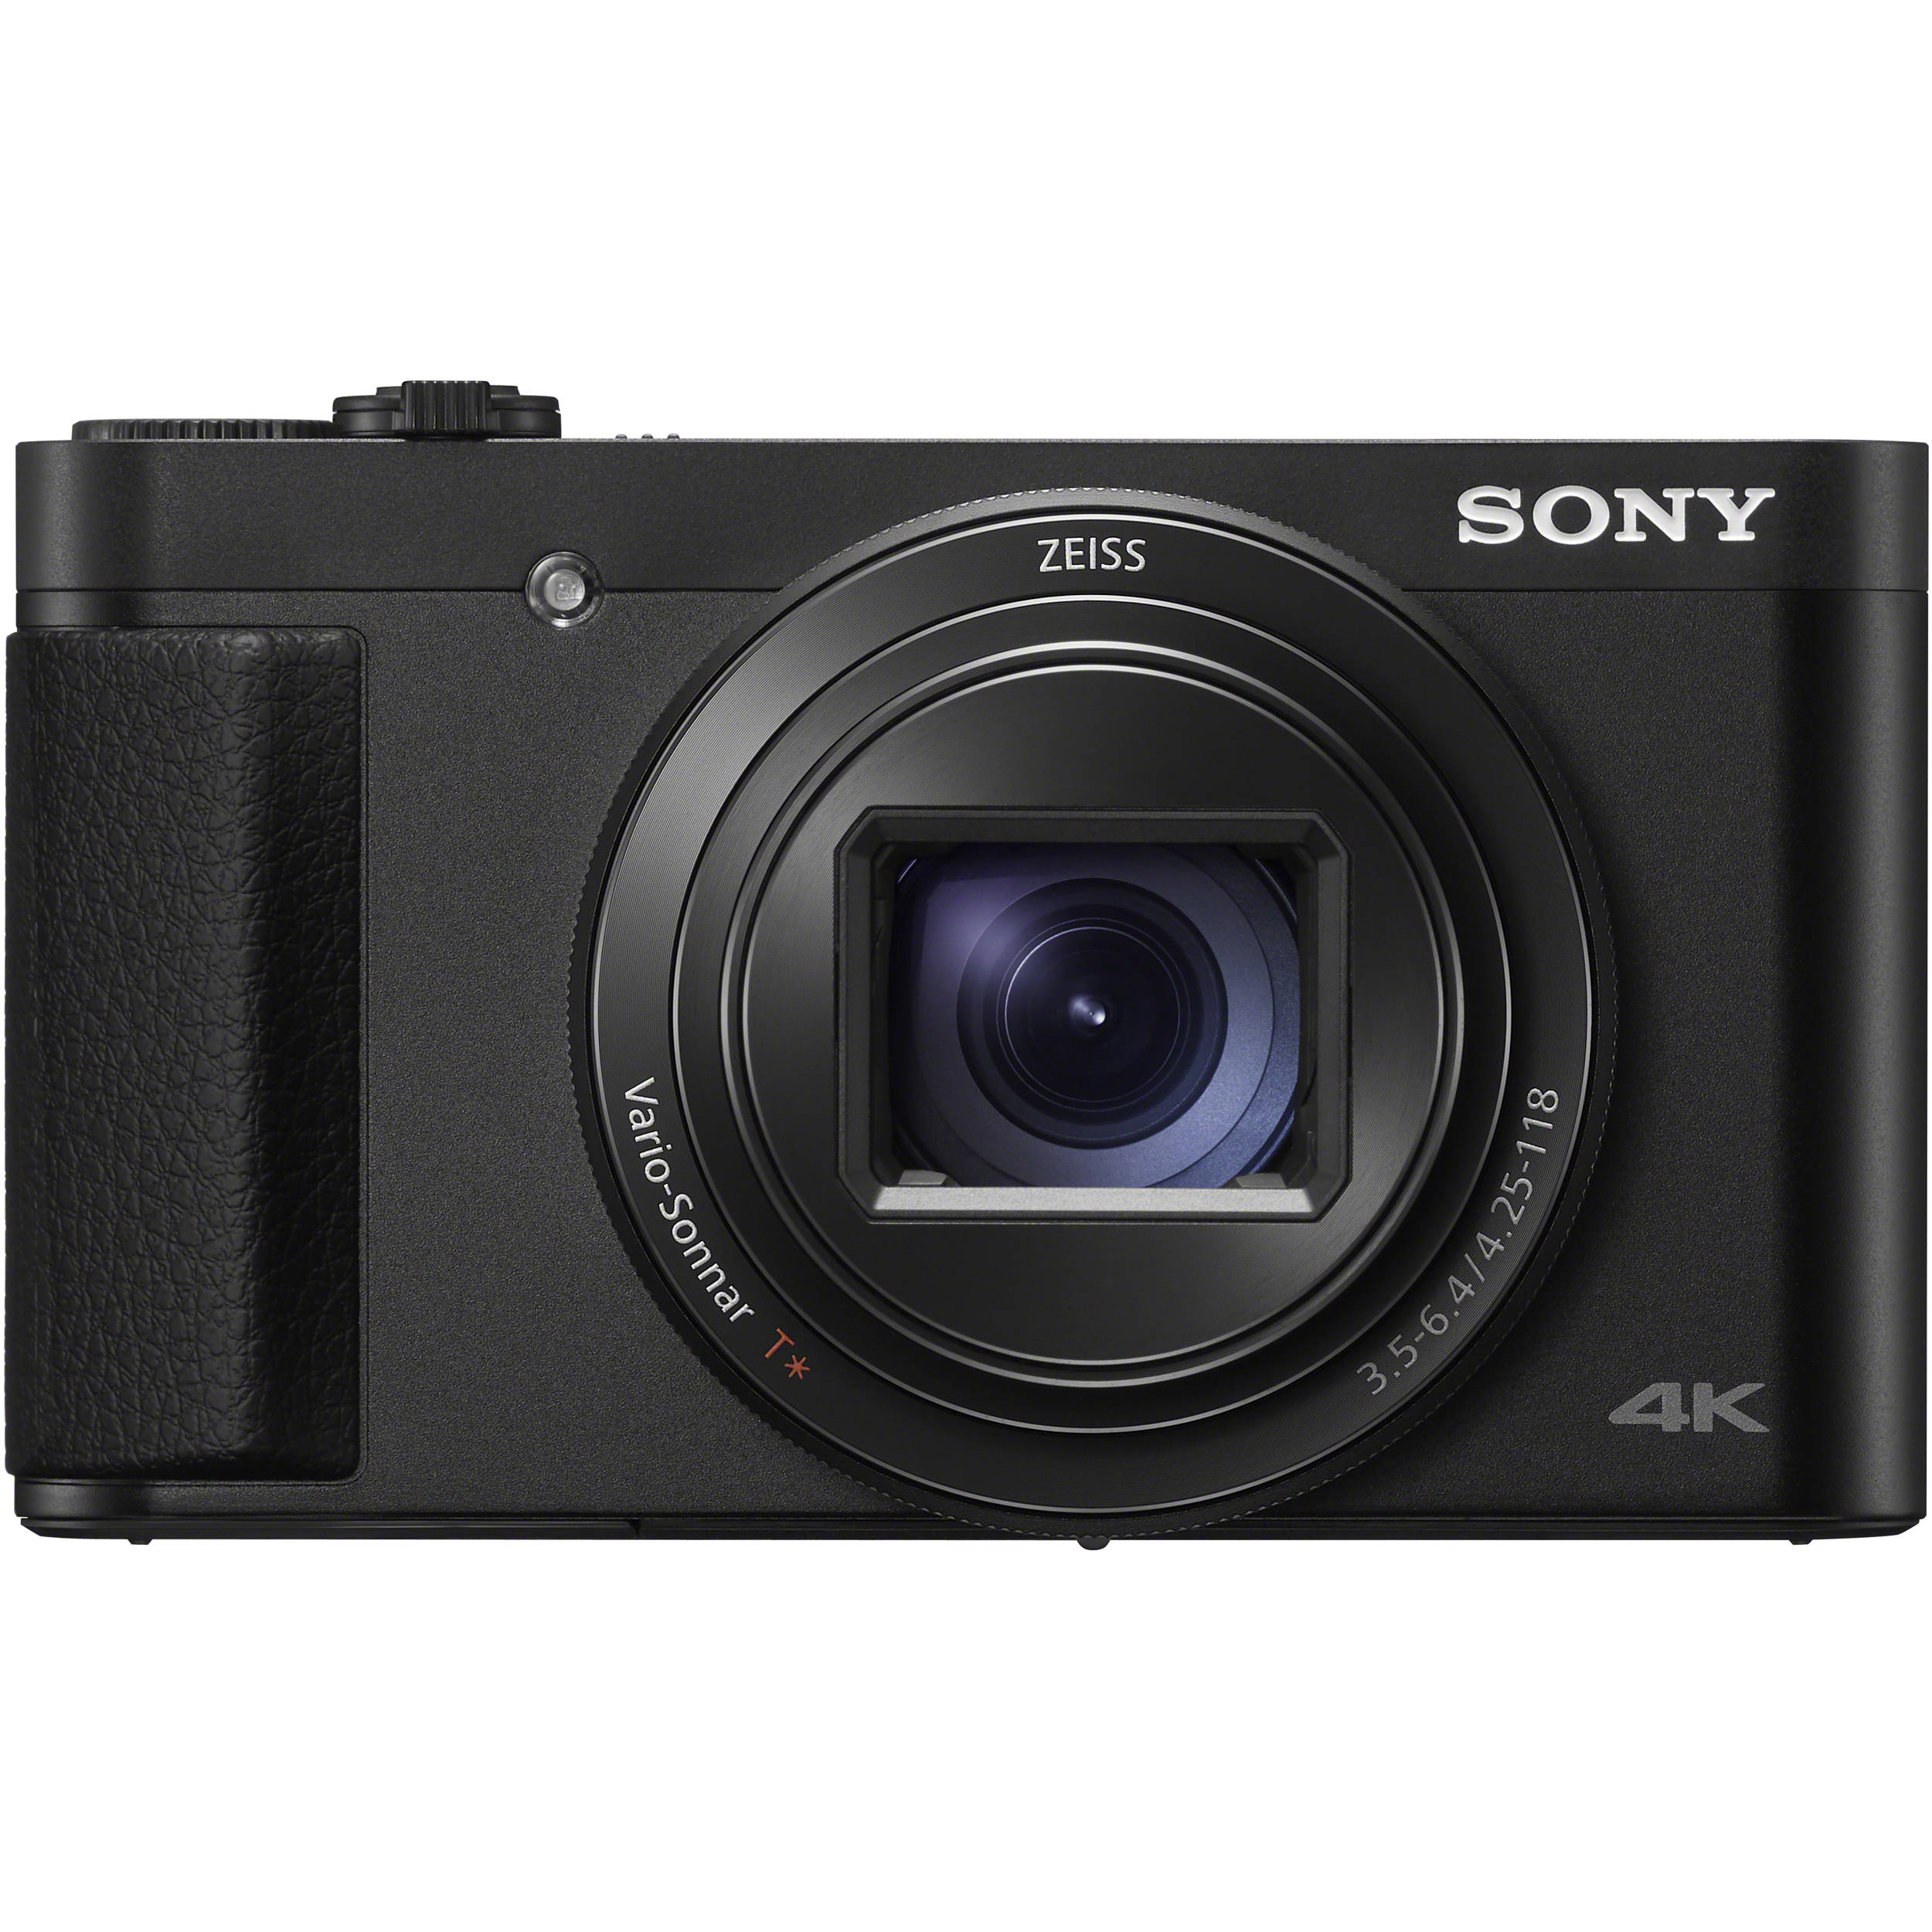 HX99 Compact Camera with 24-720 mm zoom